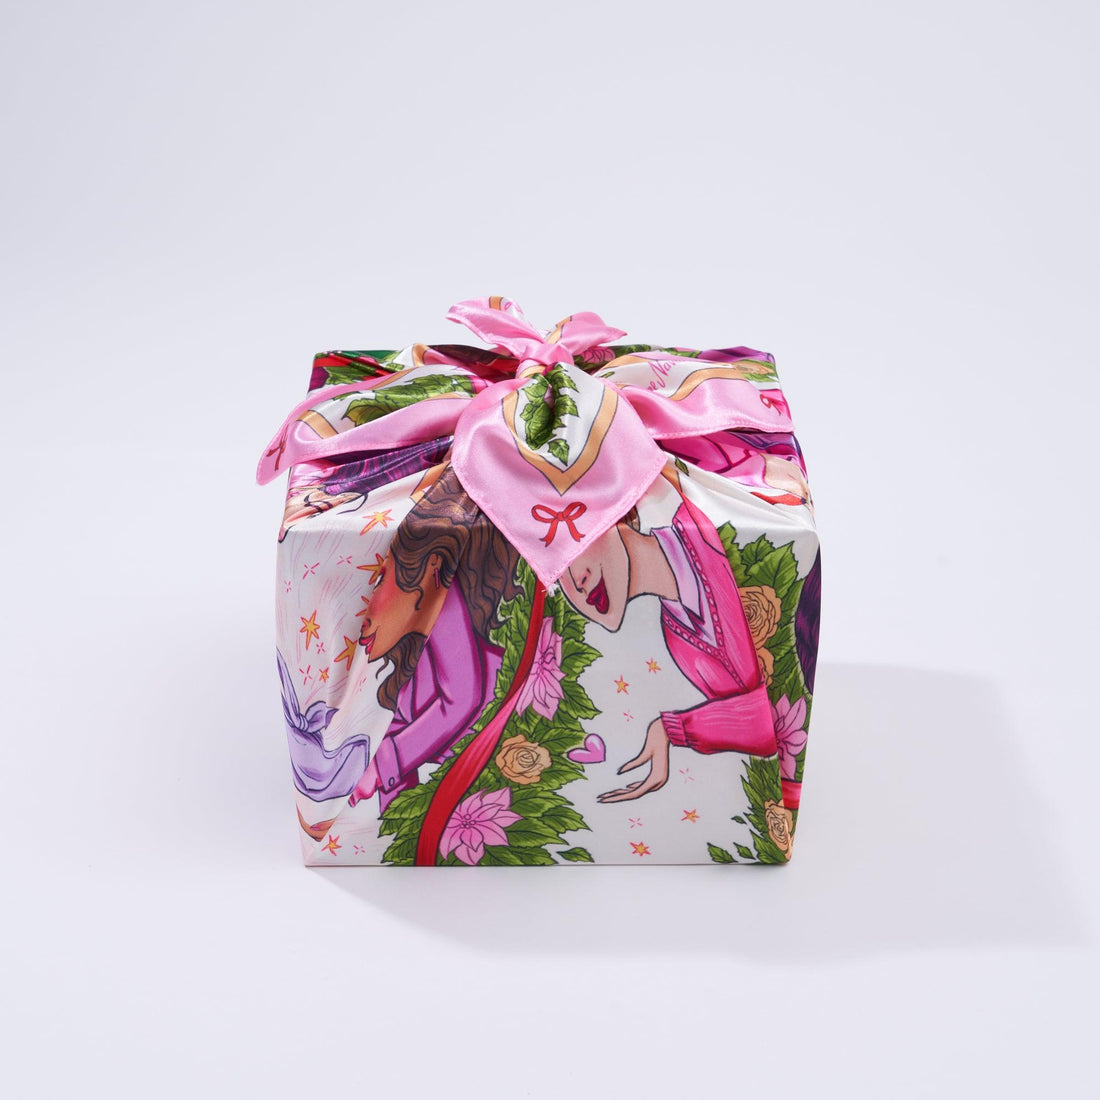 Connection | 28" Furoshiki Gift Wrap designed by Noelle Anne Navarrete - Wrappr